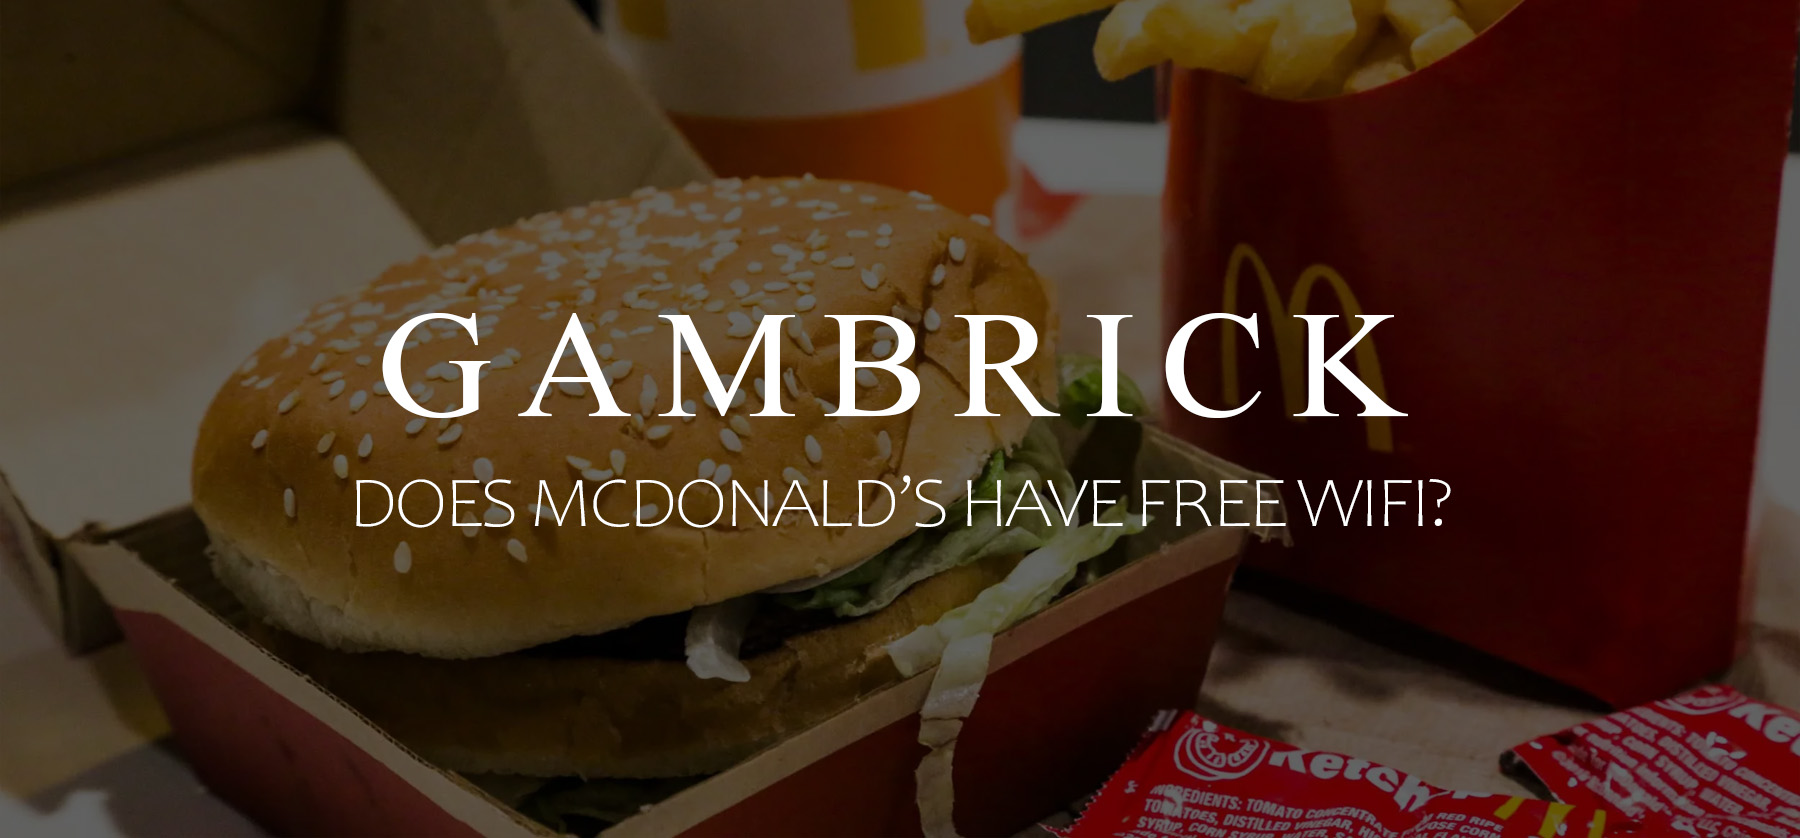 does Mcdonald's have free WiFi banner 1.1